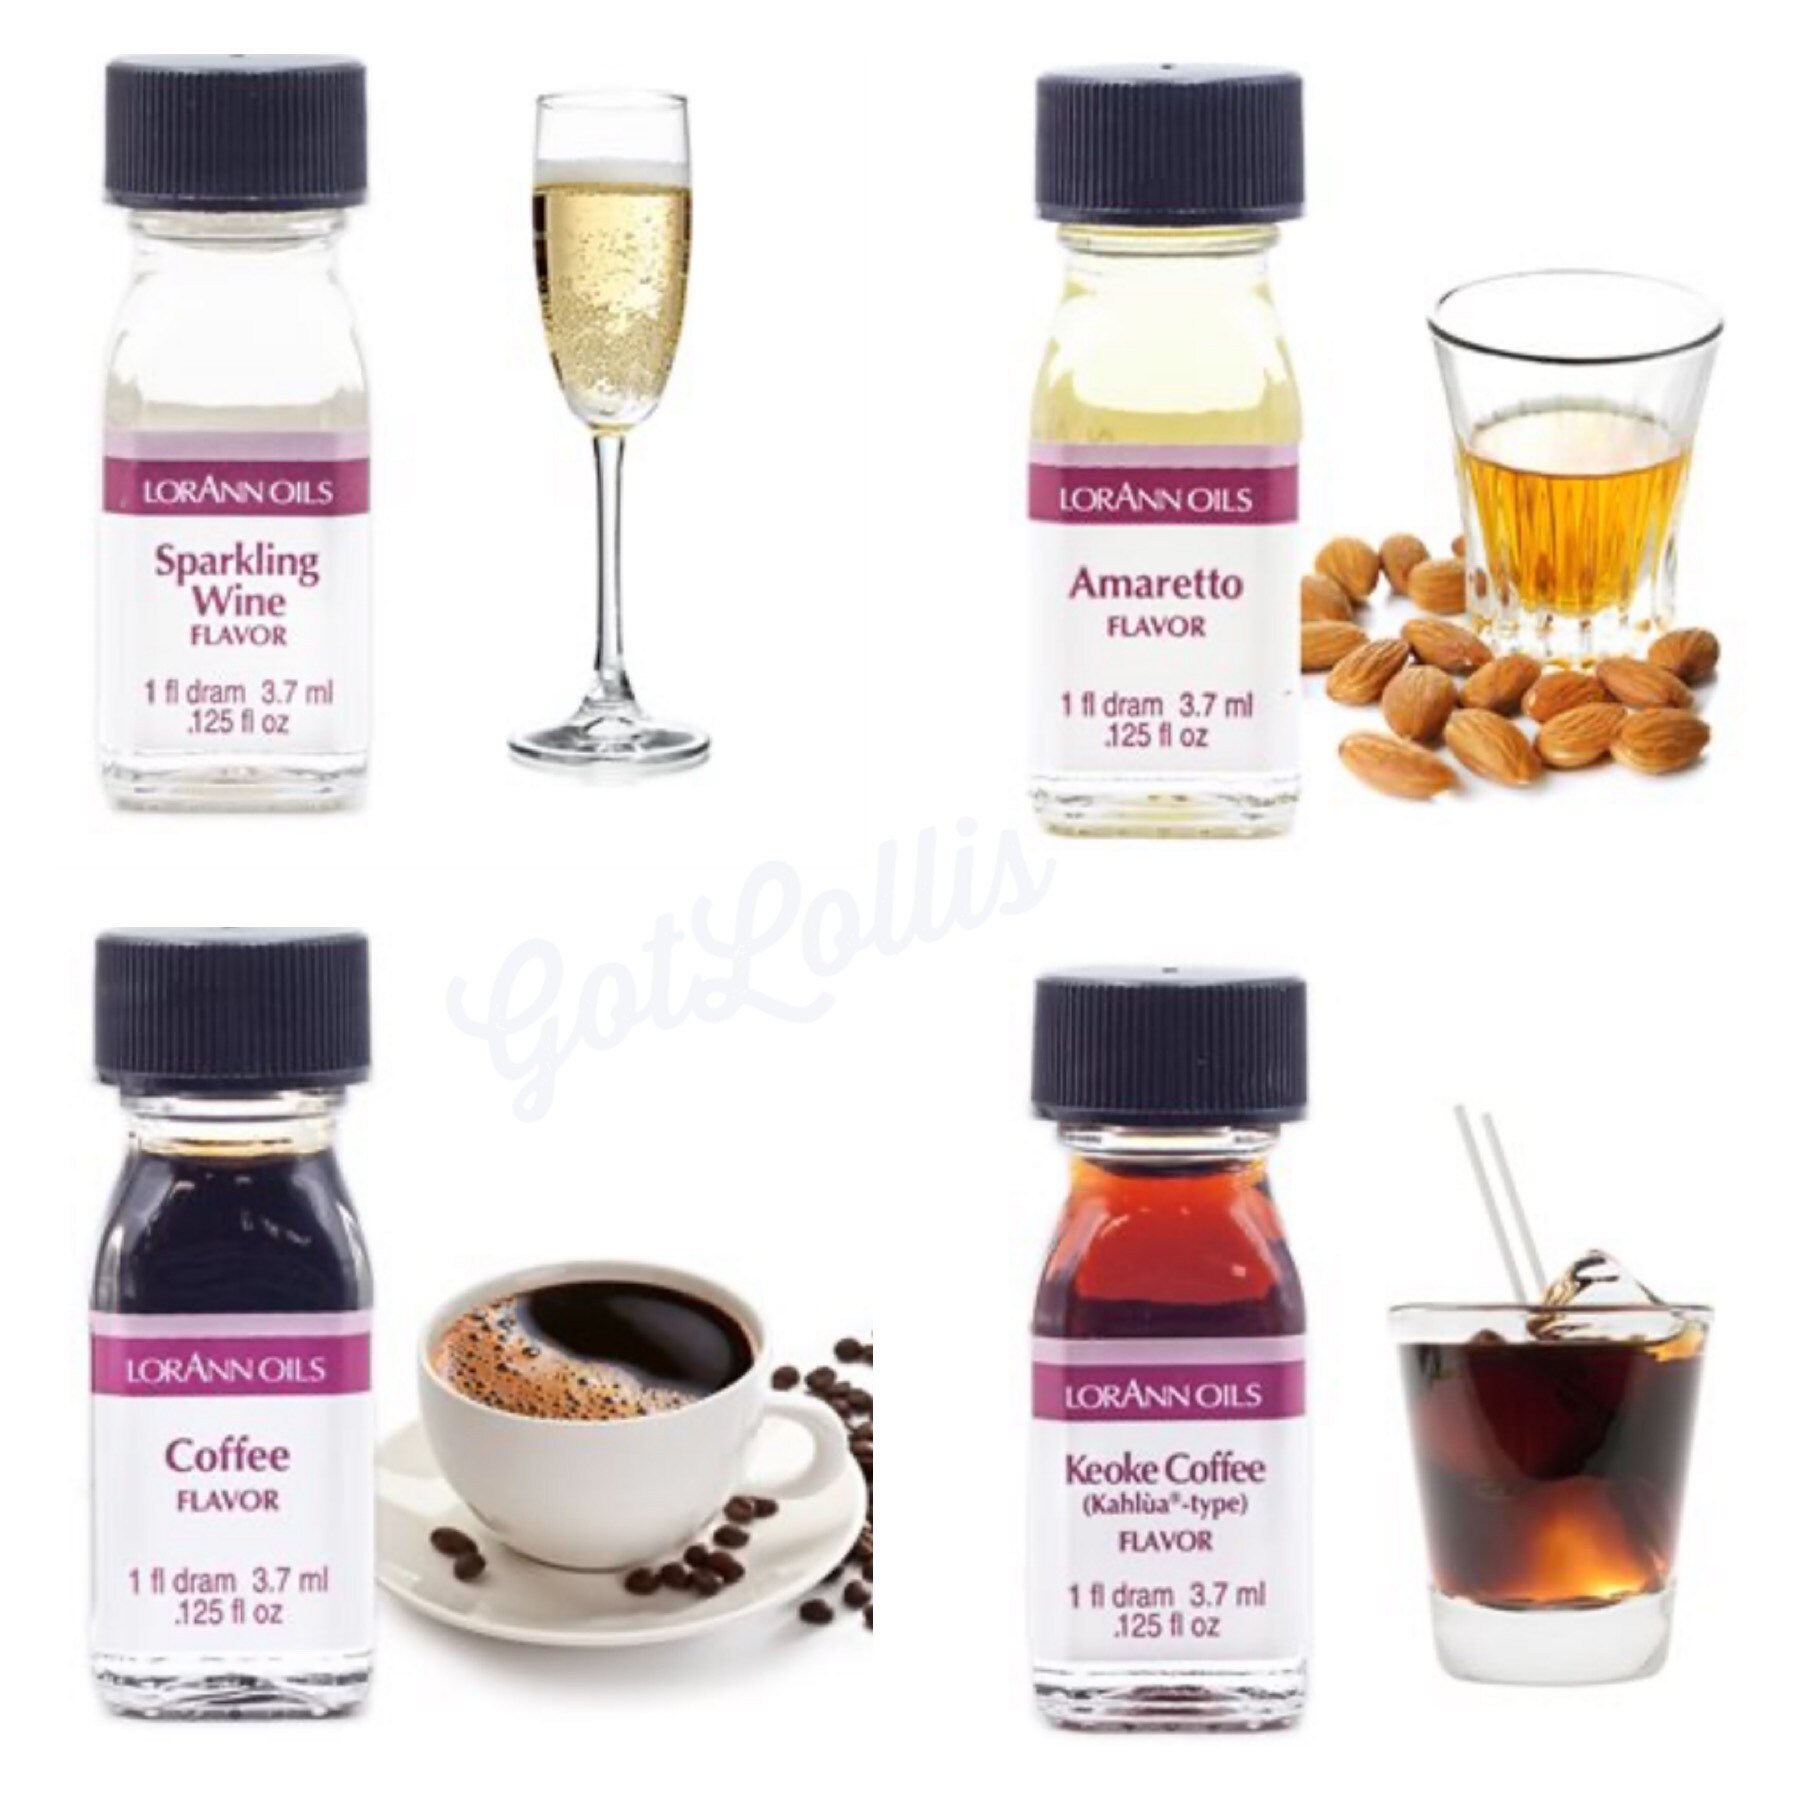 NEW/BEVERAGES FLAVORS, 1 Dram Extra Strength Candy Oil. Great for Baking,  Cooking, Lip Glosses and More. 